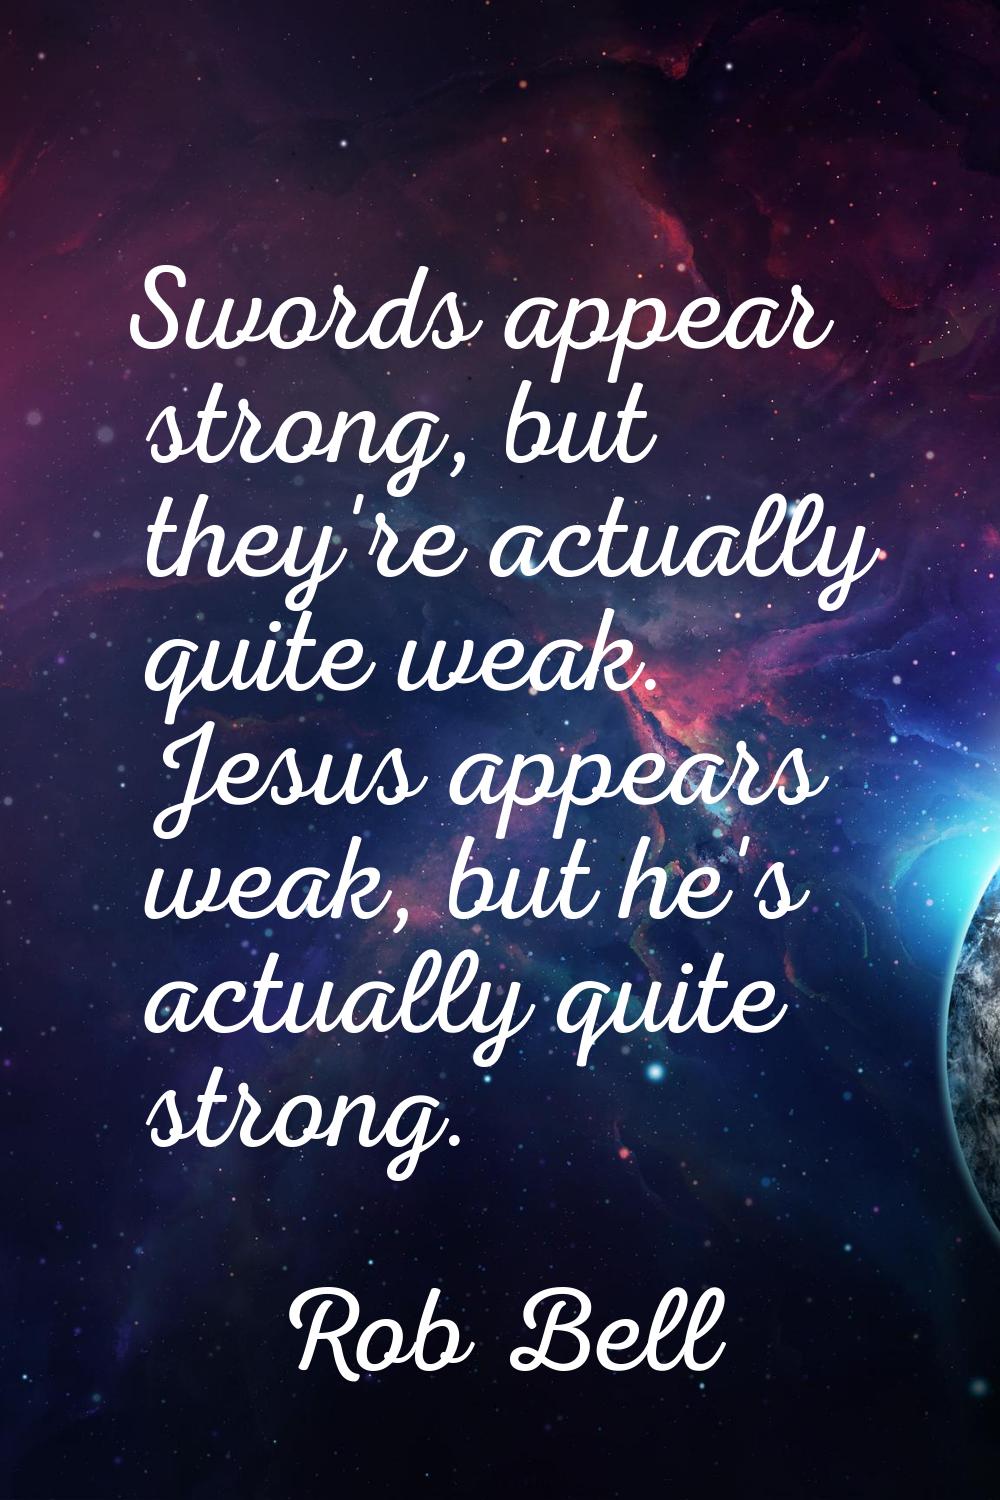 Swords appear strong, but they're actually quite weak. Jesus appears weak, but he's actually quite 